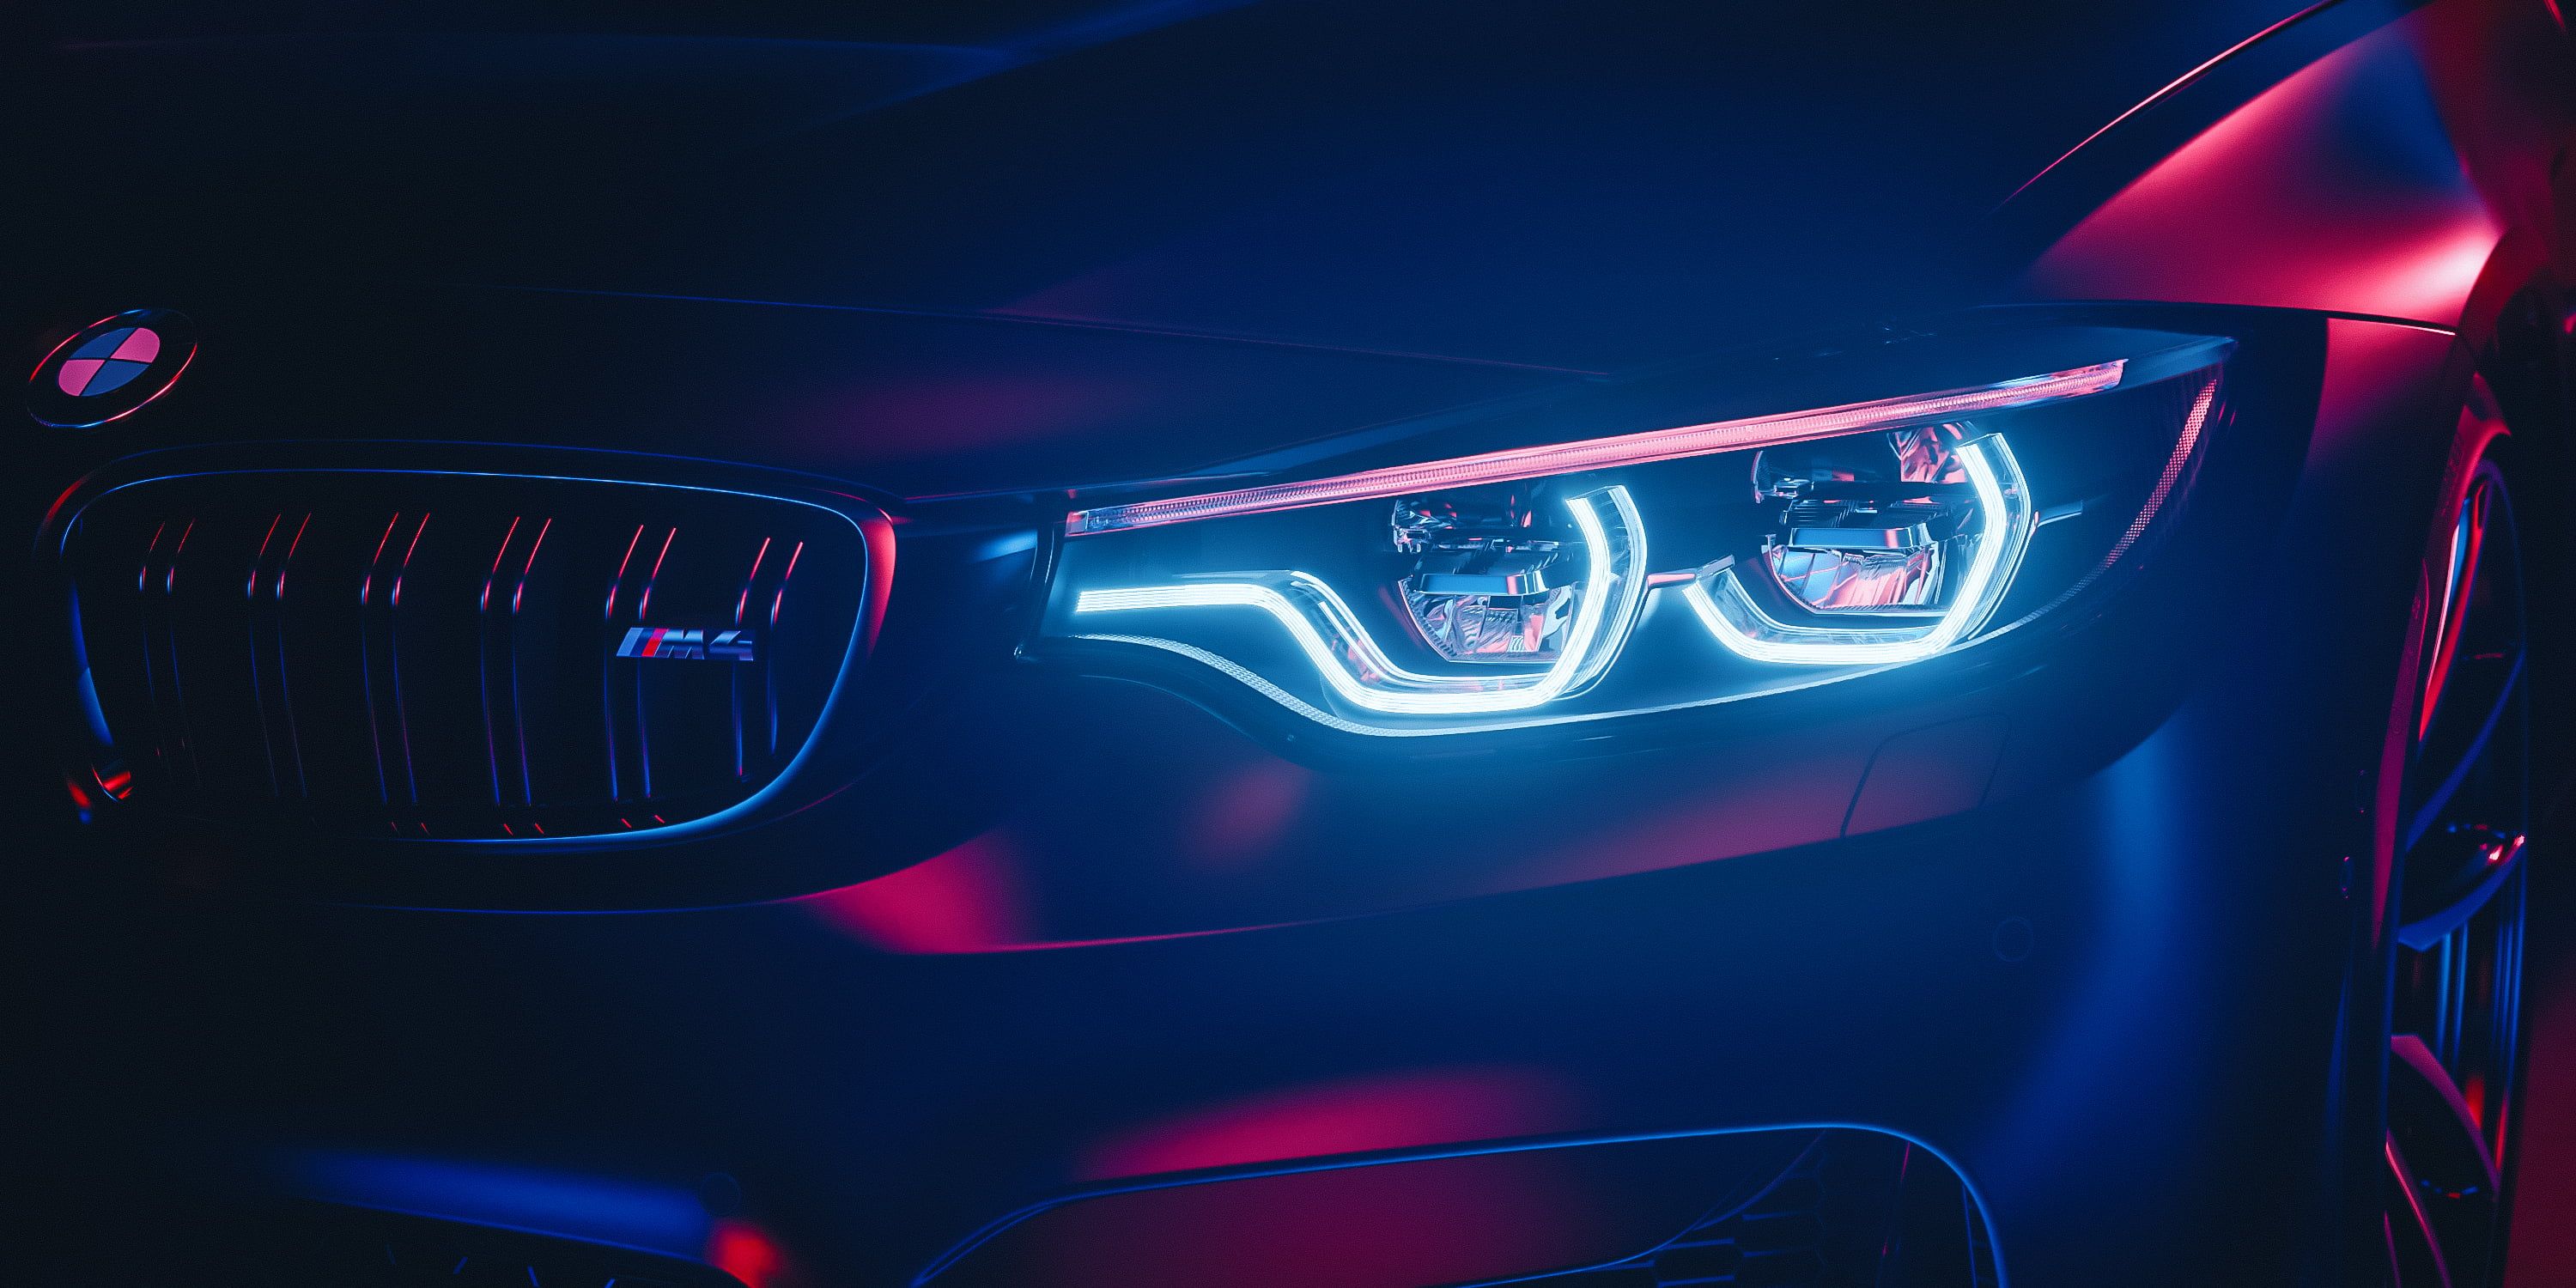 A close up of the headlights on an automobile - BMW